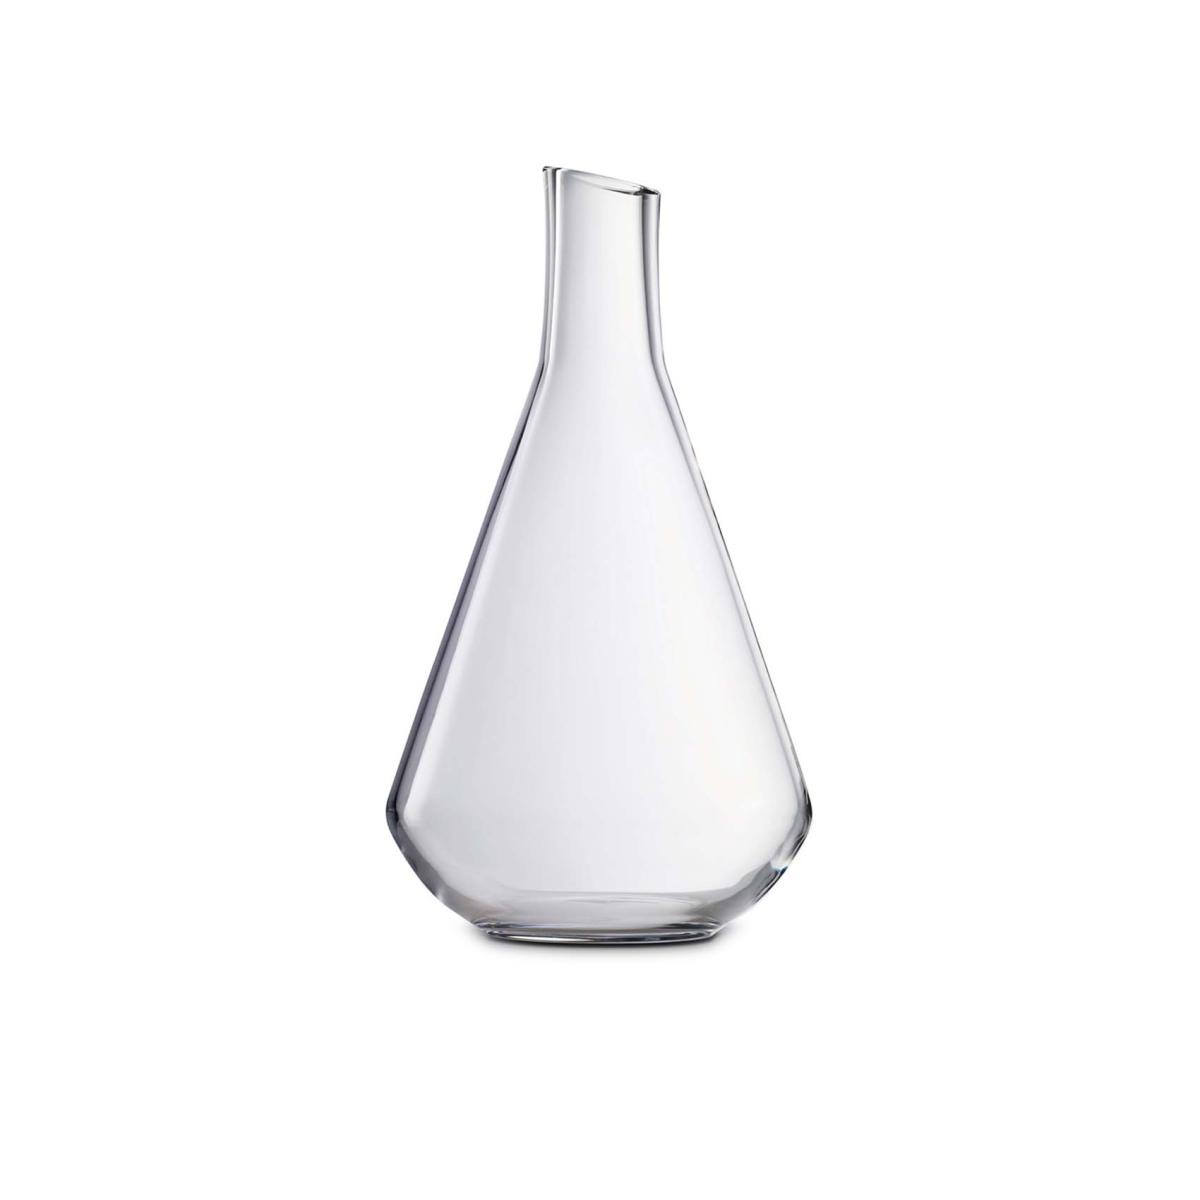 Baccarat Chateau Baccarat Carafe Decanter